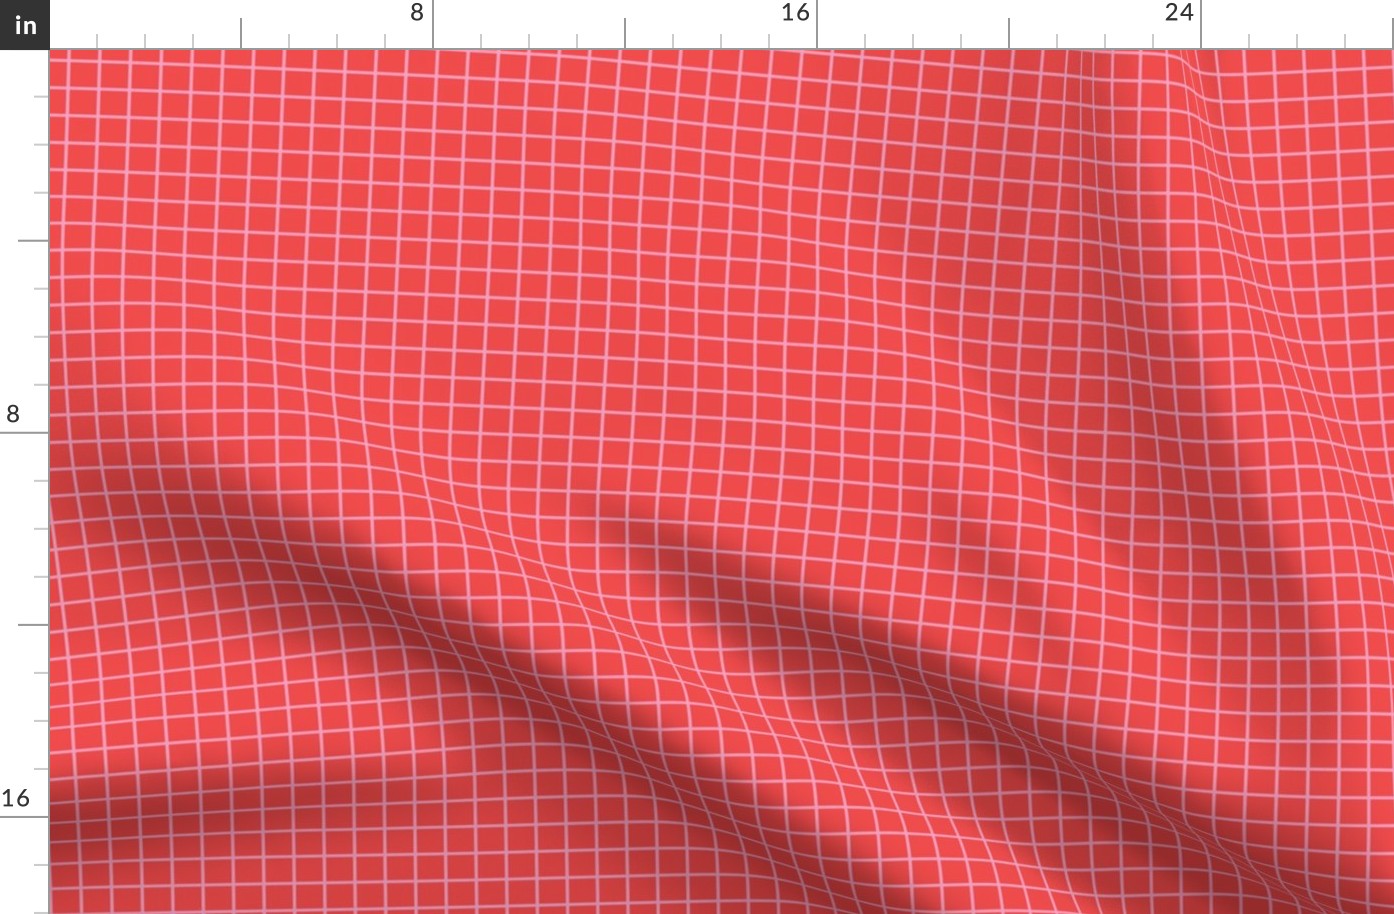 Graph Paper | Lg Hot Pink on Tangy Red